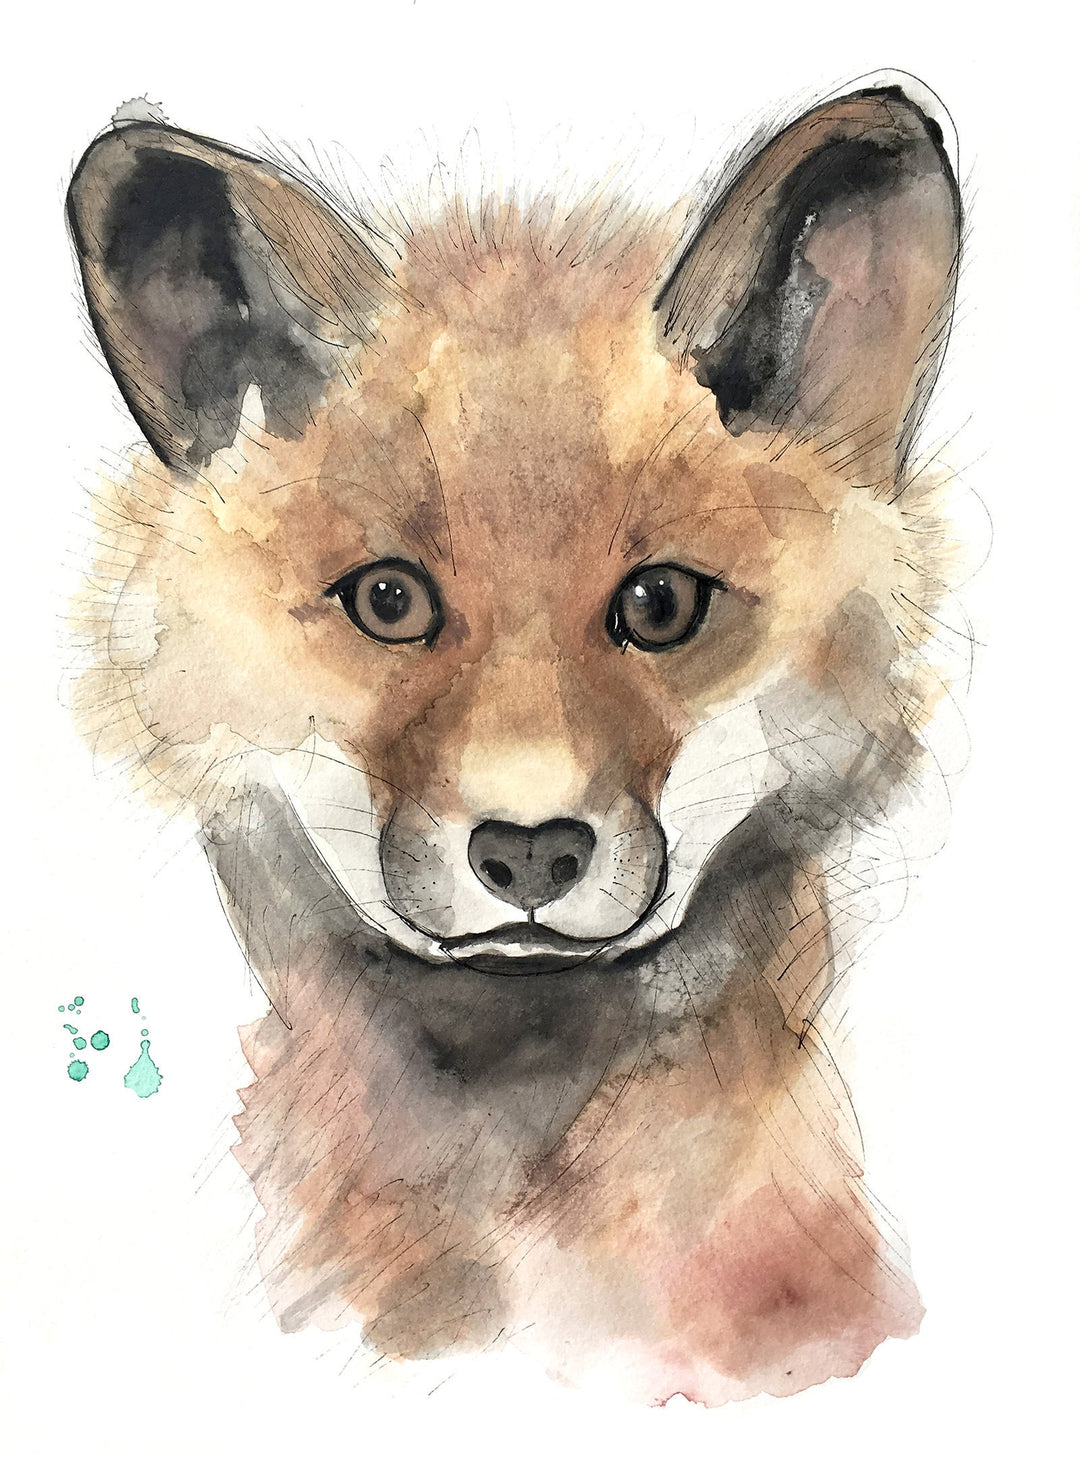 Personalized fox face birth poster